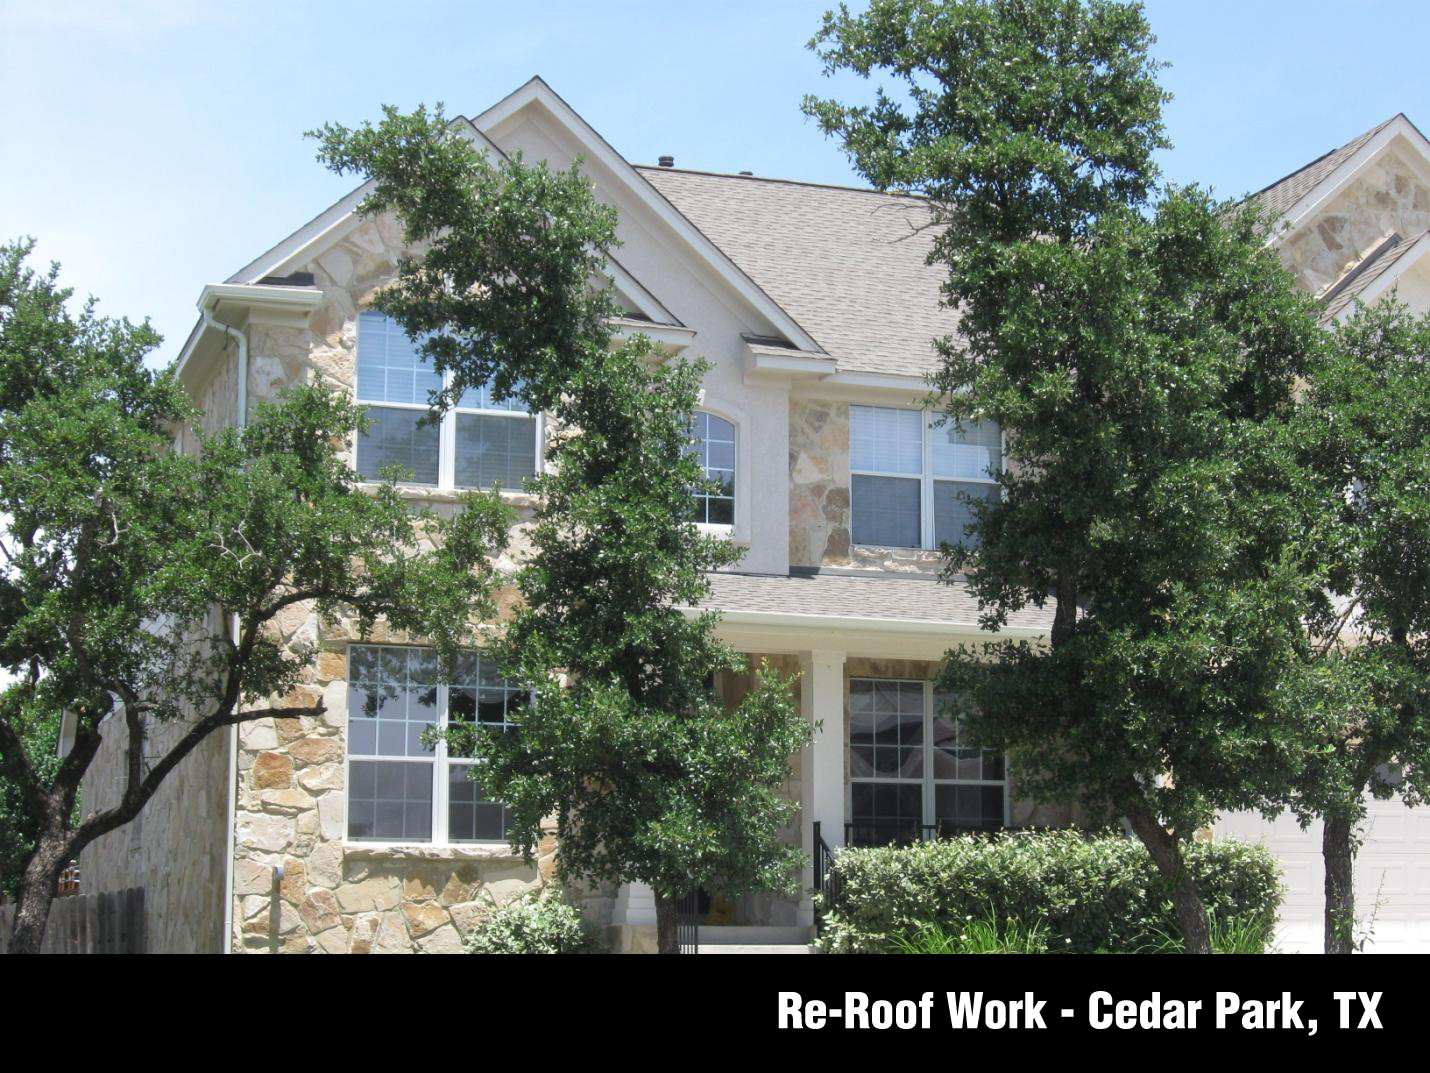 Another Roof Replacement done in Cedar Park by All Star Roofing